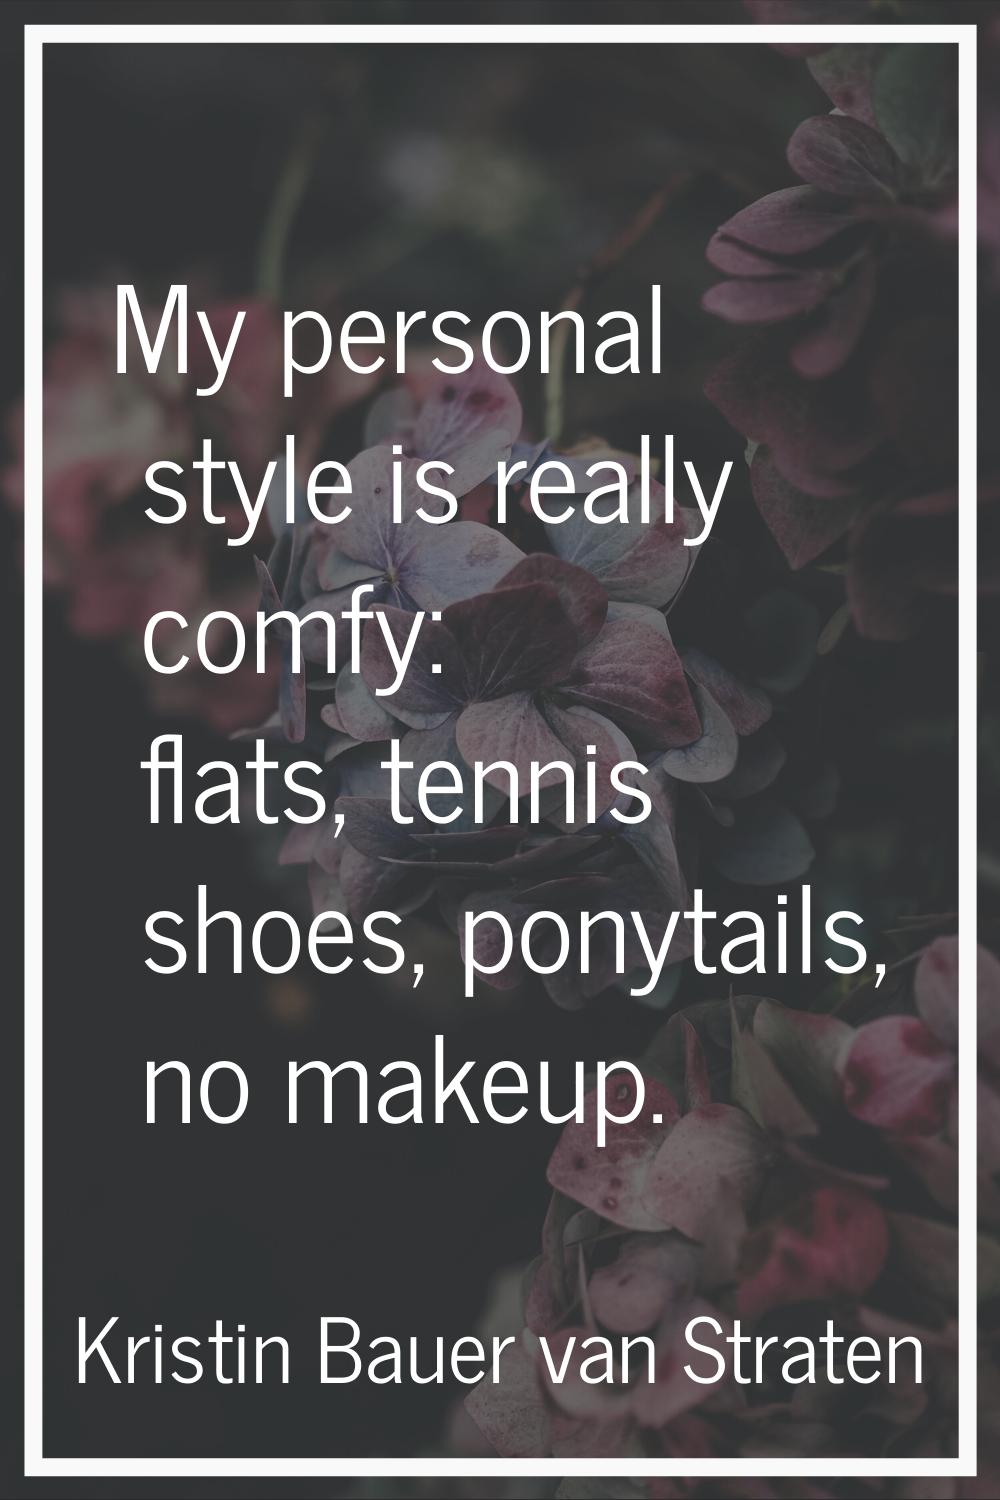 My personal style is really comfy: flats, tennis shoes, ponytails, no makeup.